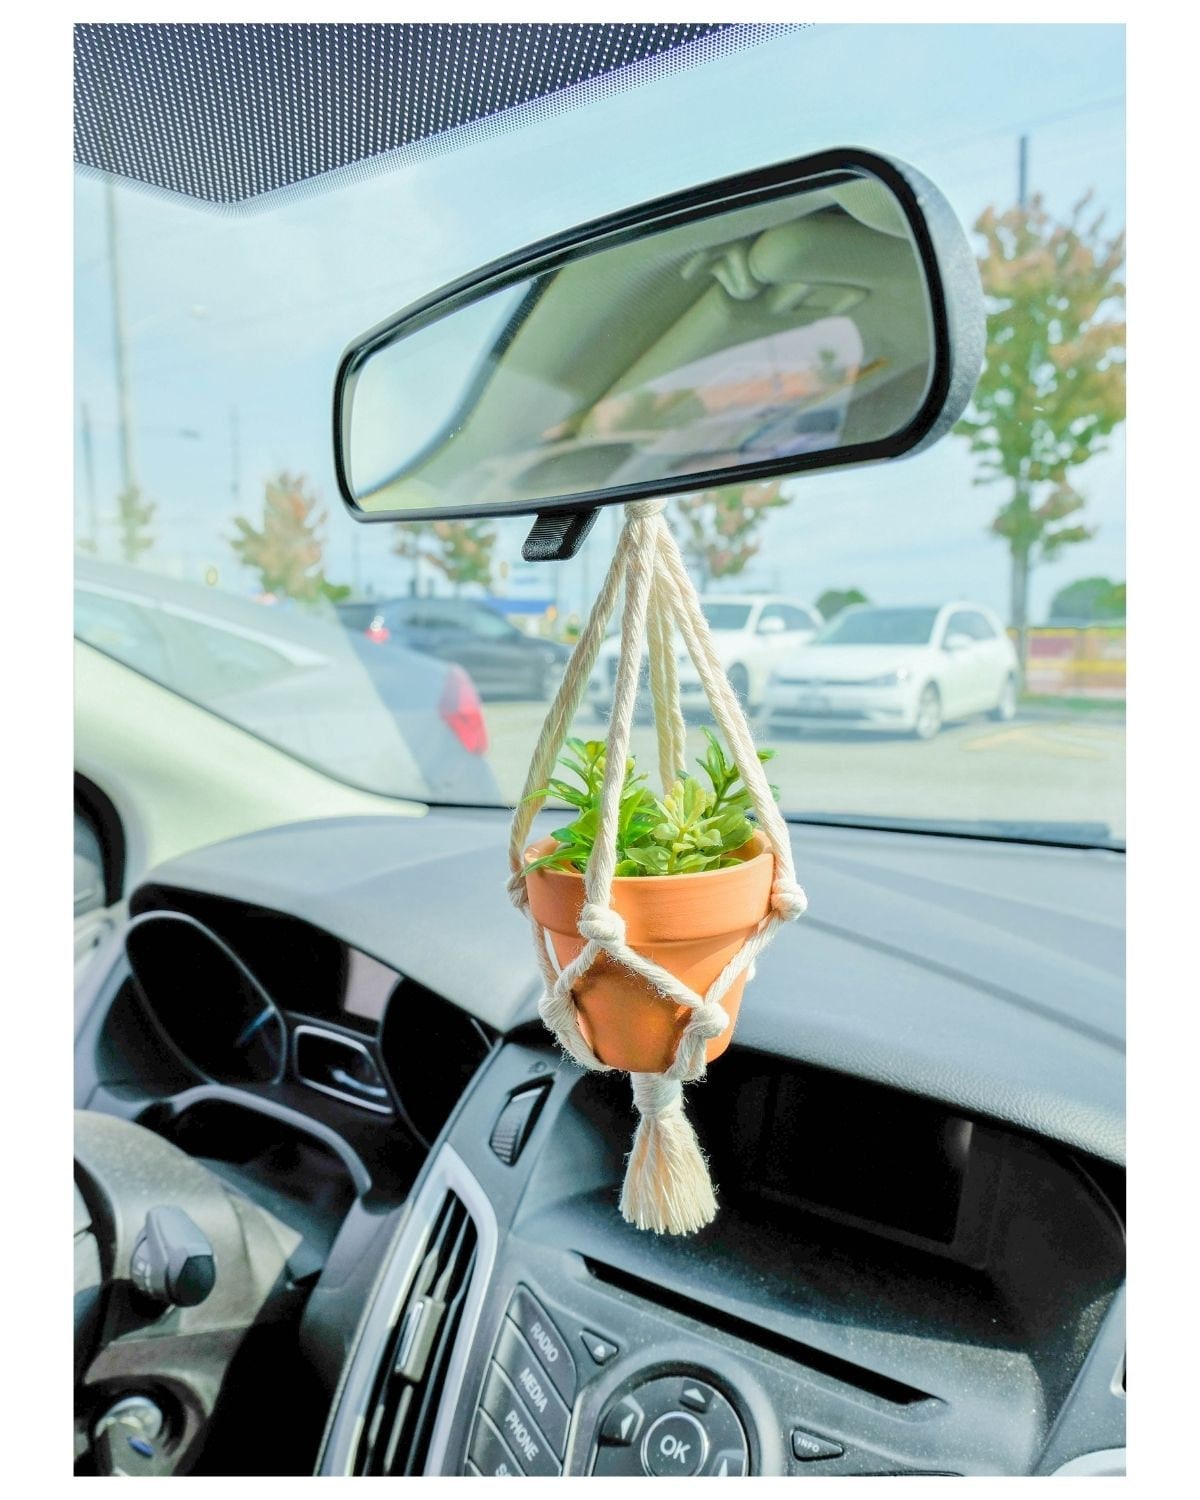 Buy Rear View Mirror Accessories, Car Plant Hanger, Hanging